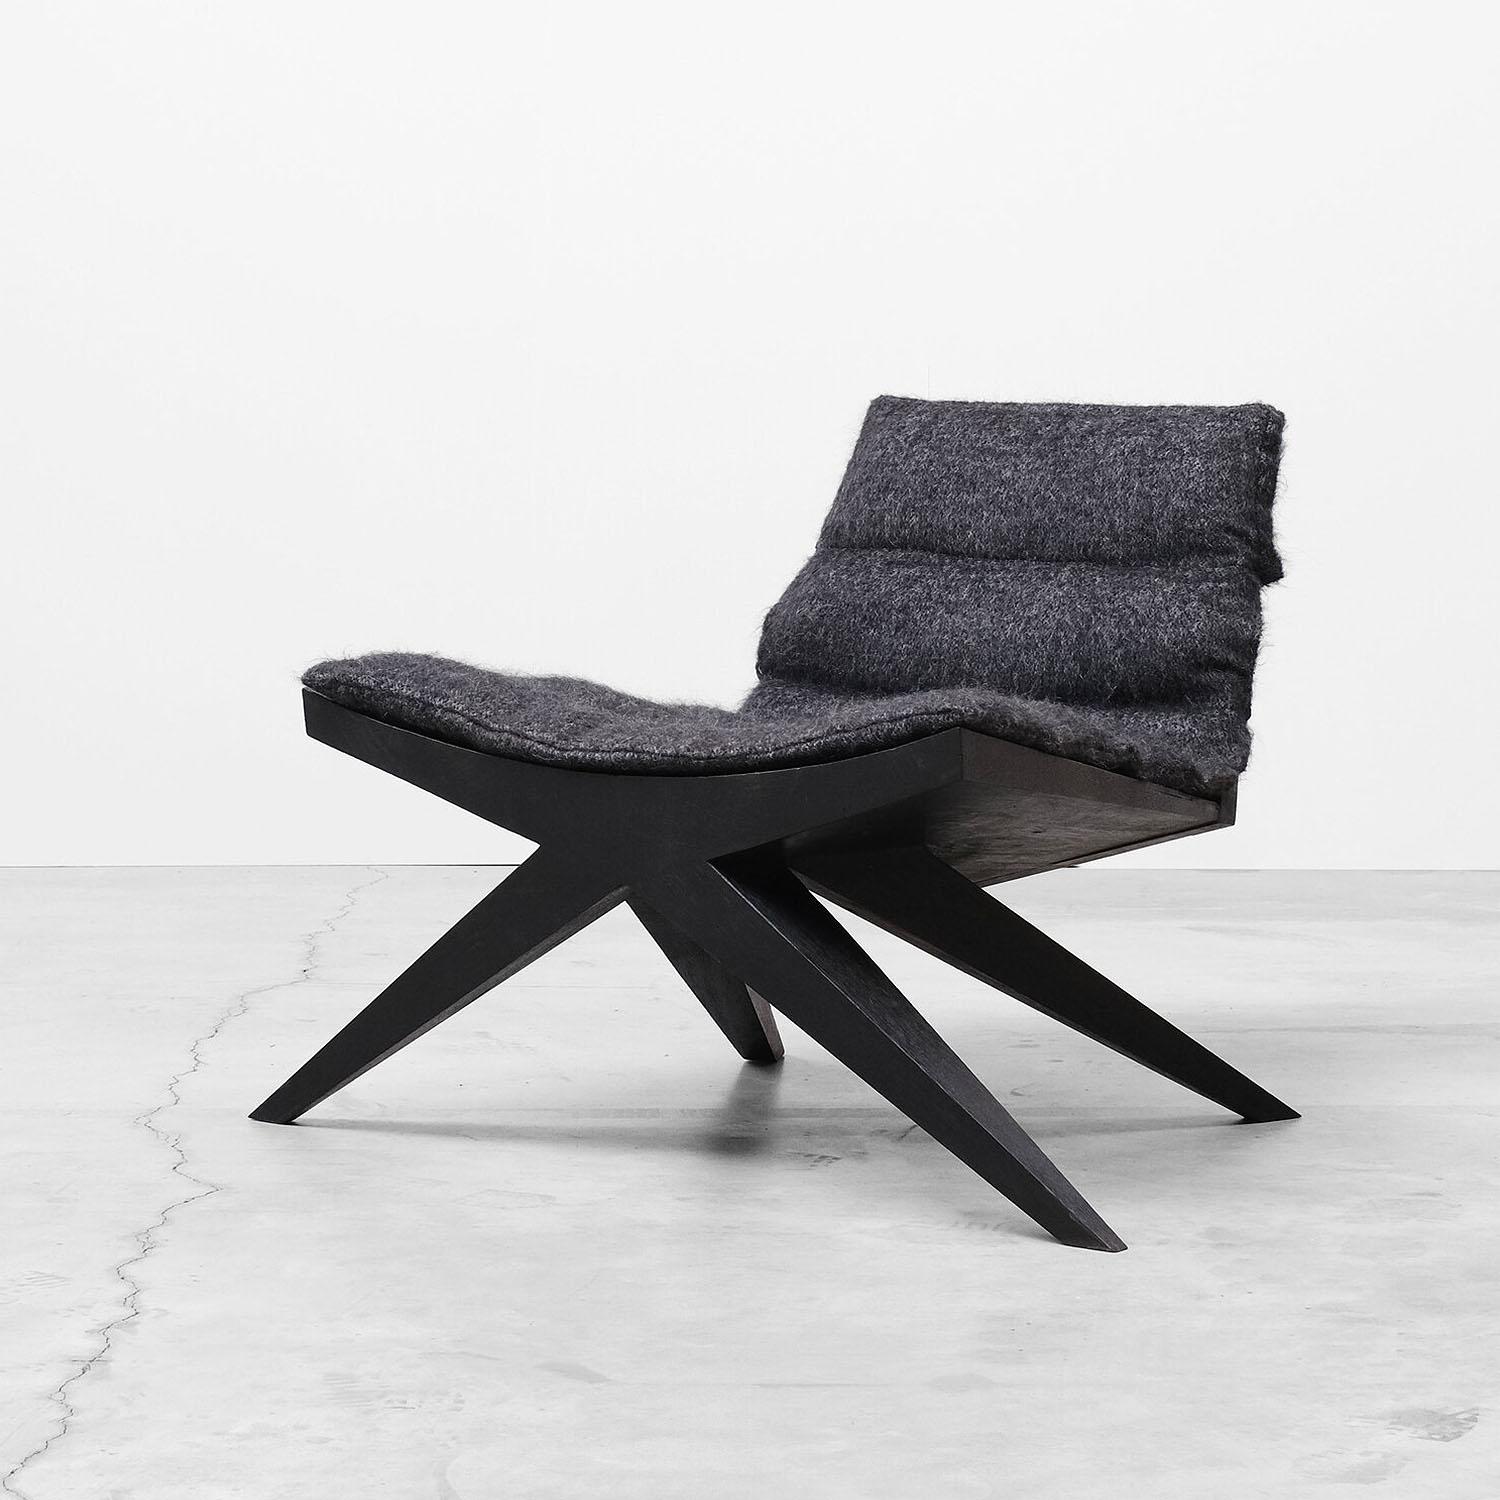 Contemporary lounge chair In Iroko Wood - V-Easy chair by Arno Declercq

Material: 
Burned and waxed Iroko wood.
Cushion made in mohair by Pierre Frey. More fabrics available on request.

Dimensions: 
100 cm W x 90 cm L x 70 cm H
40 ” W x